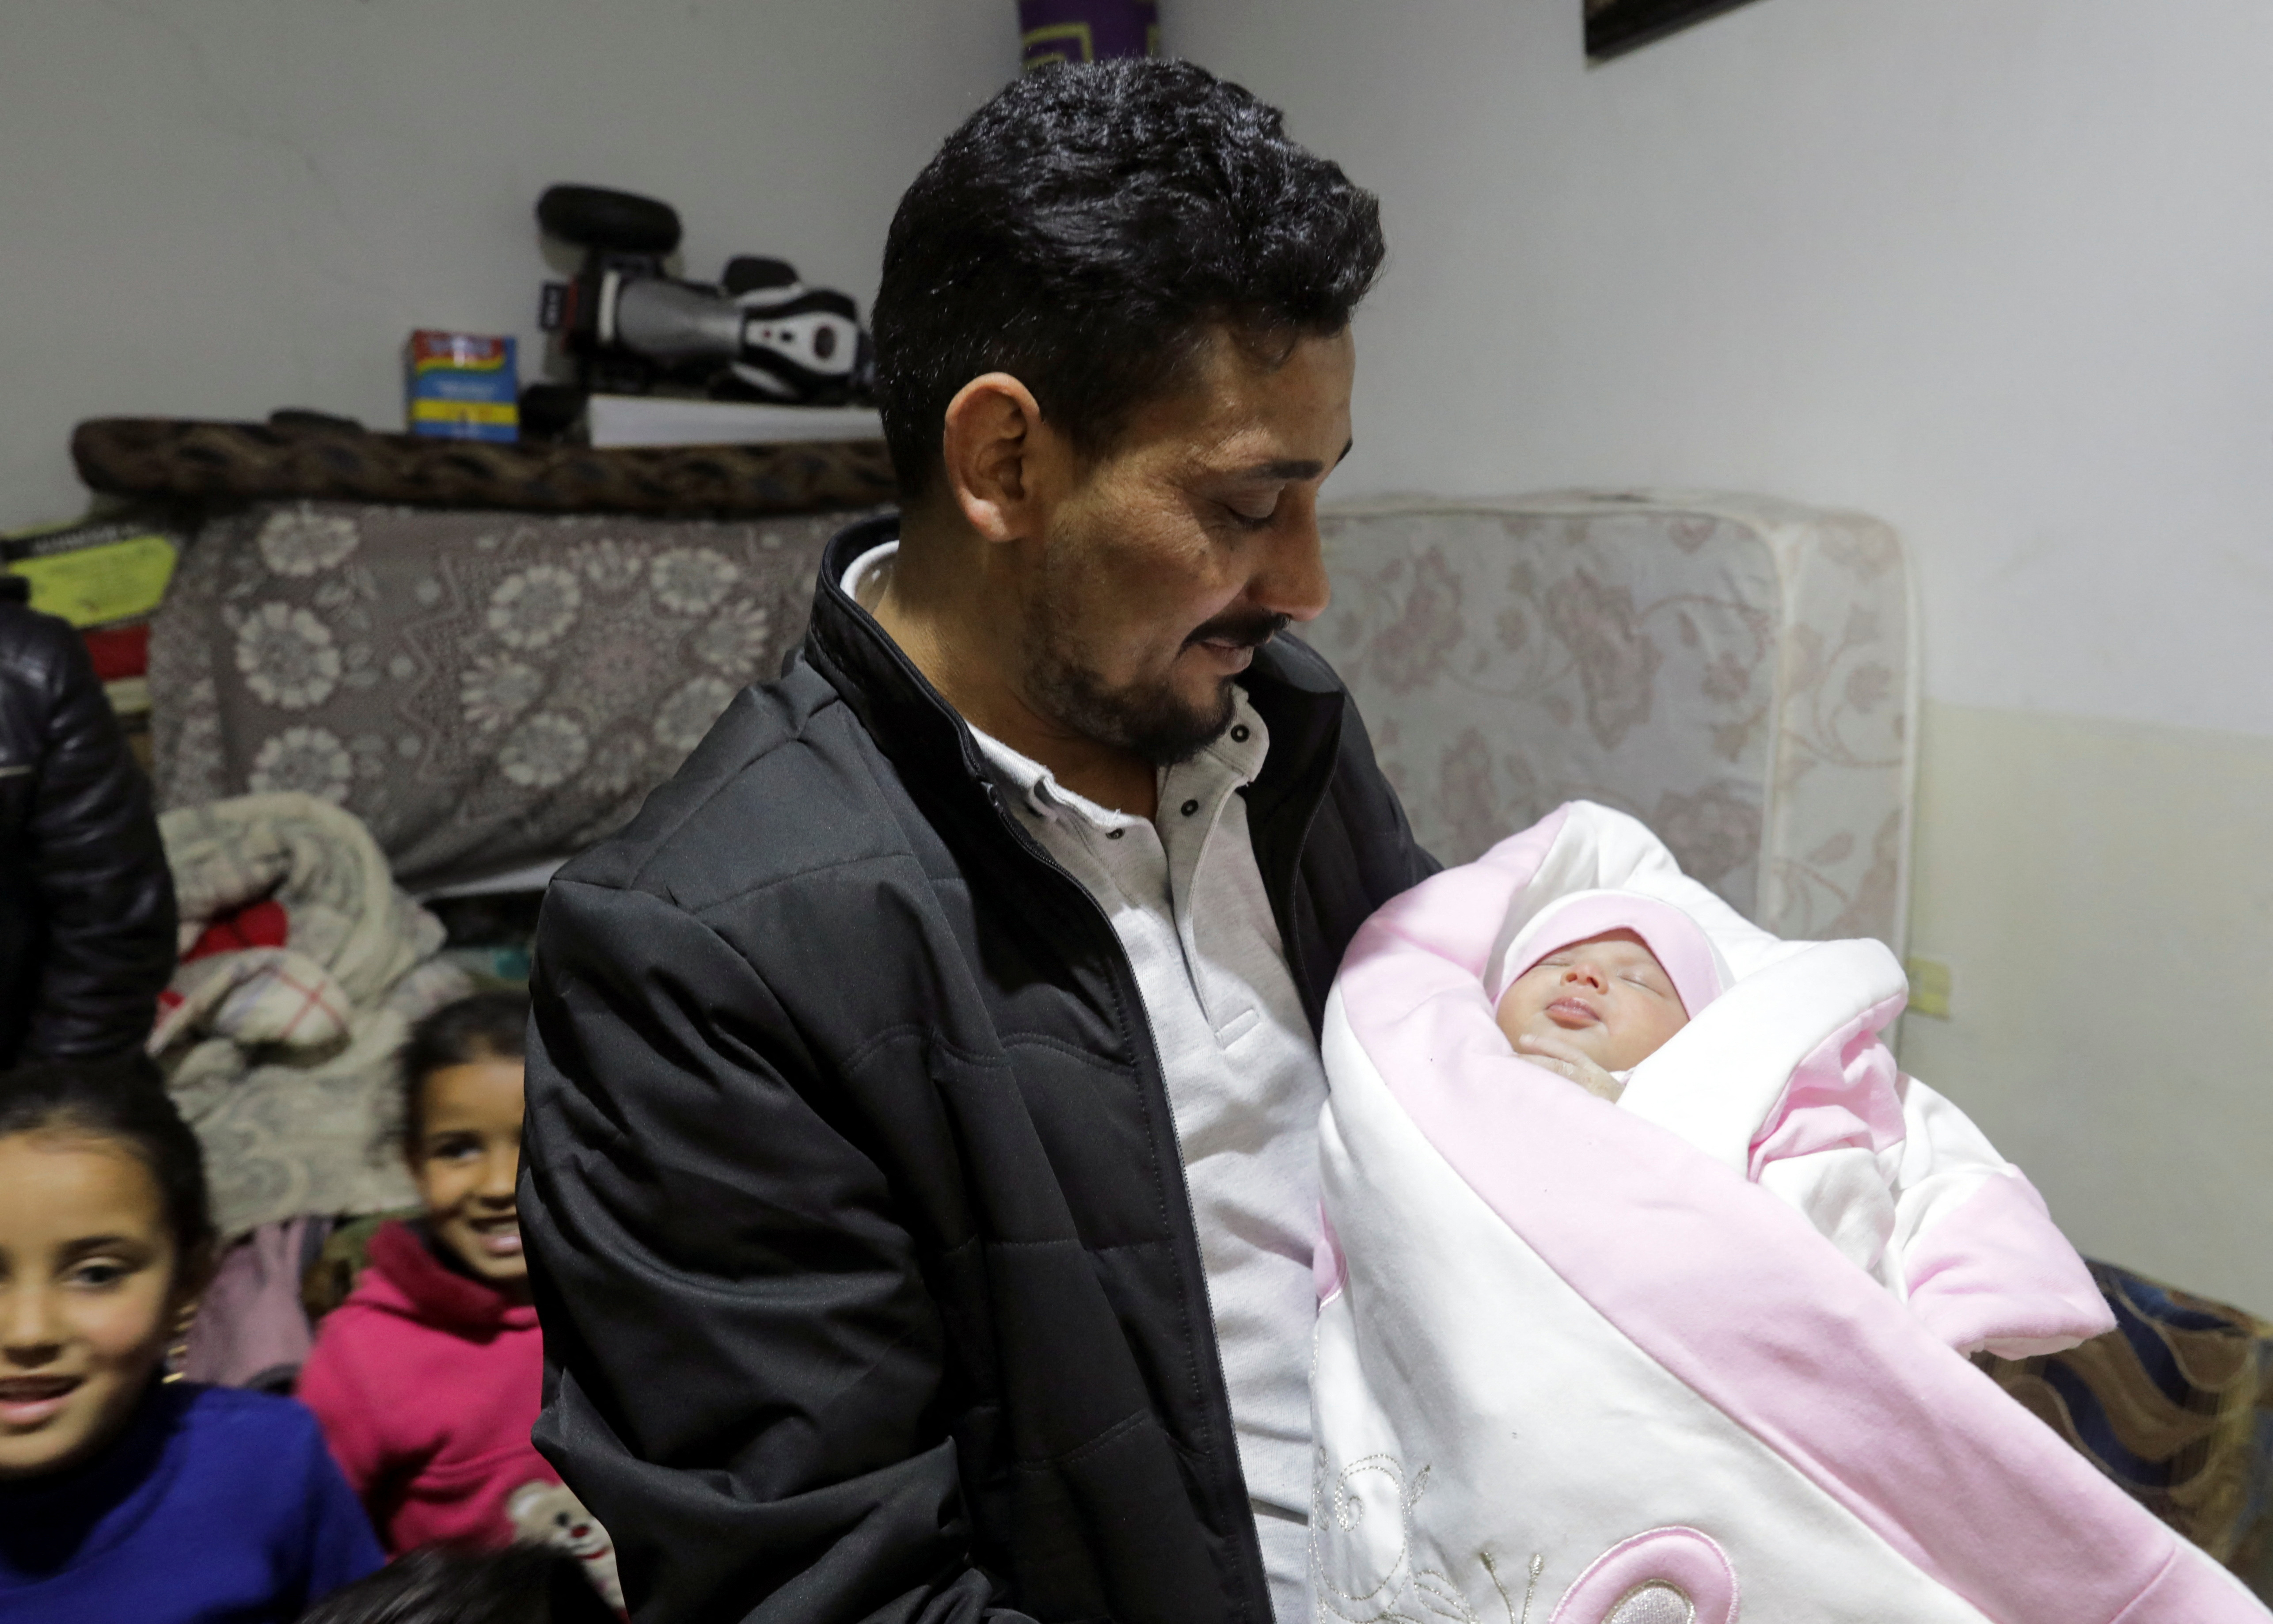 Syrian baby born in earthquake adopted by aunt and uncle